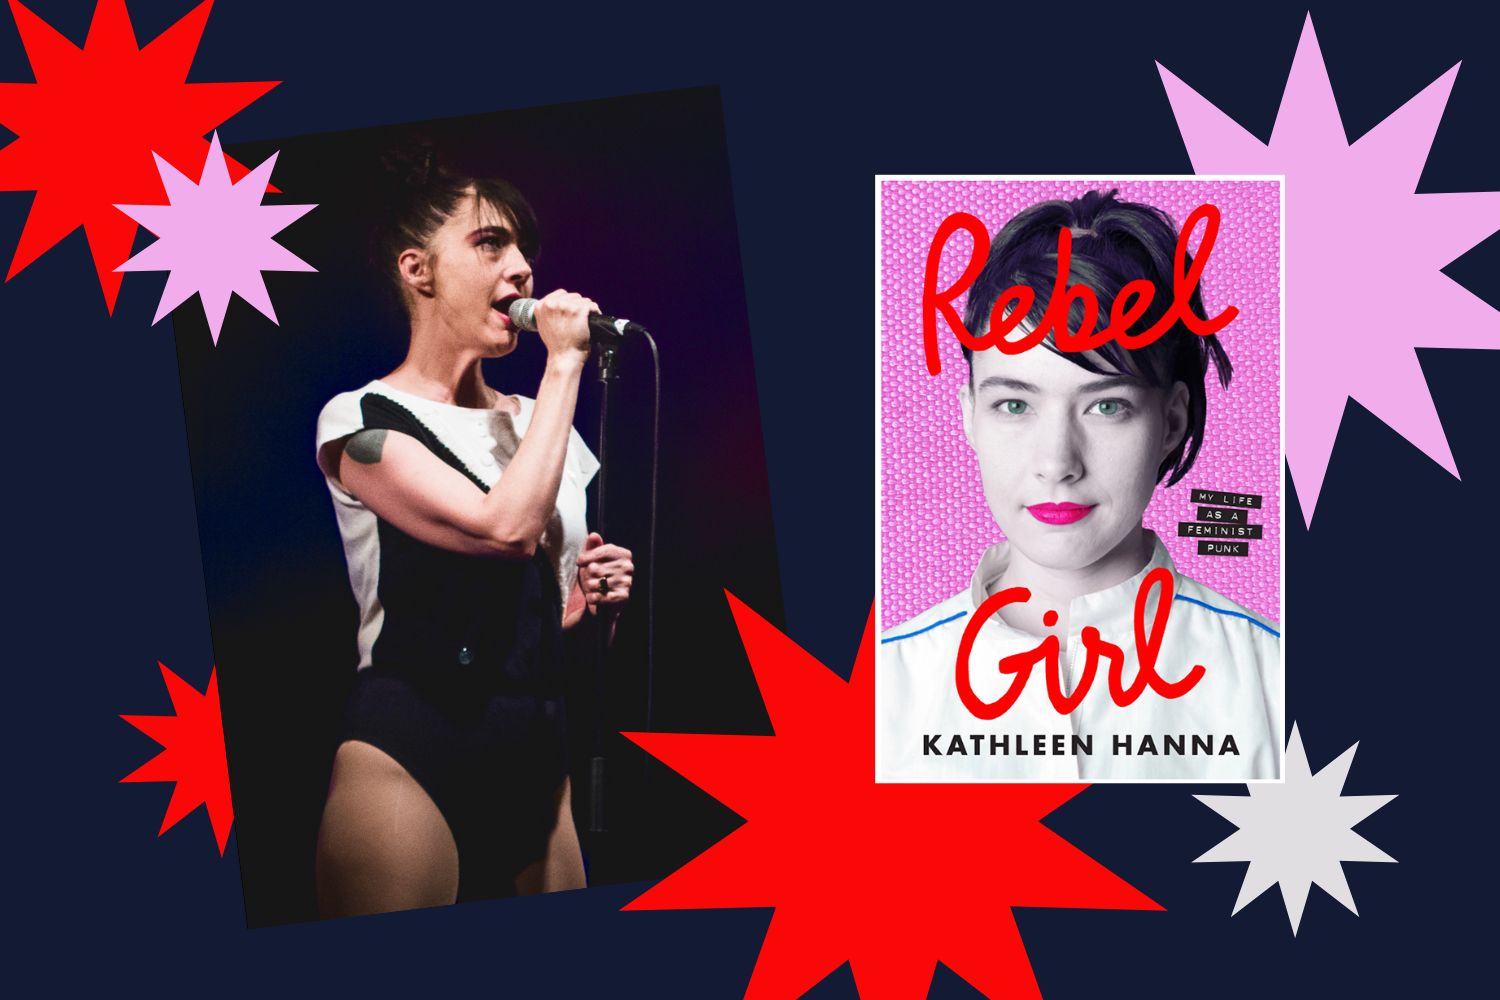 Kathleen Hanna singing and the cover of her book, Rebel Girl